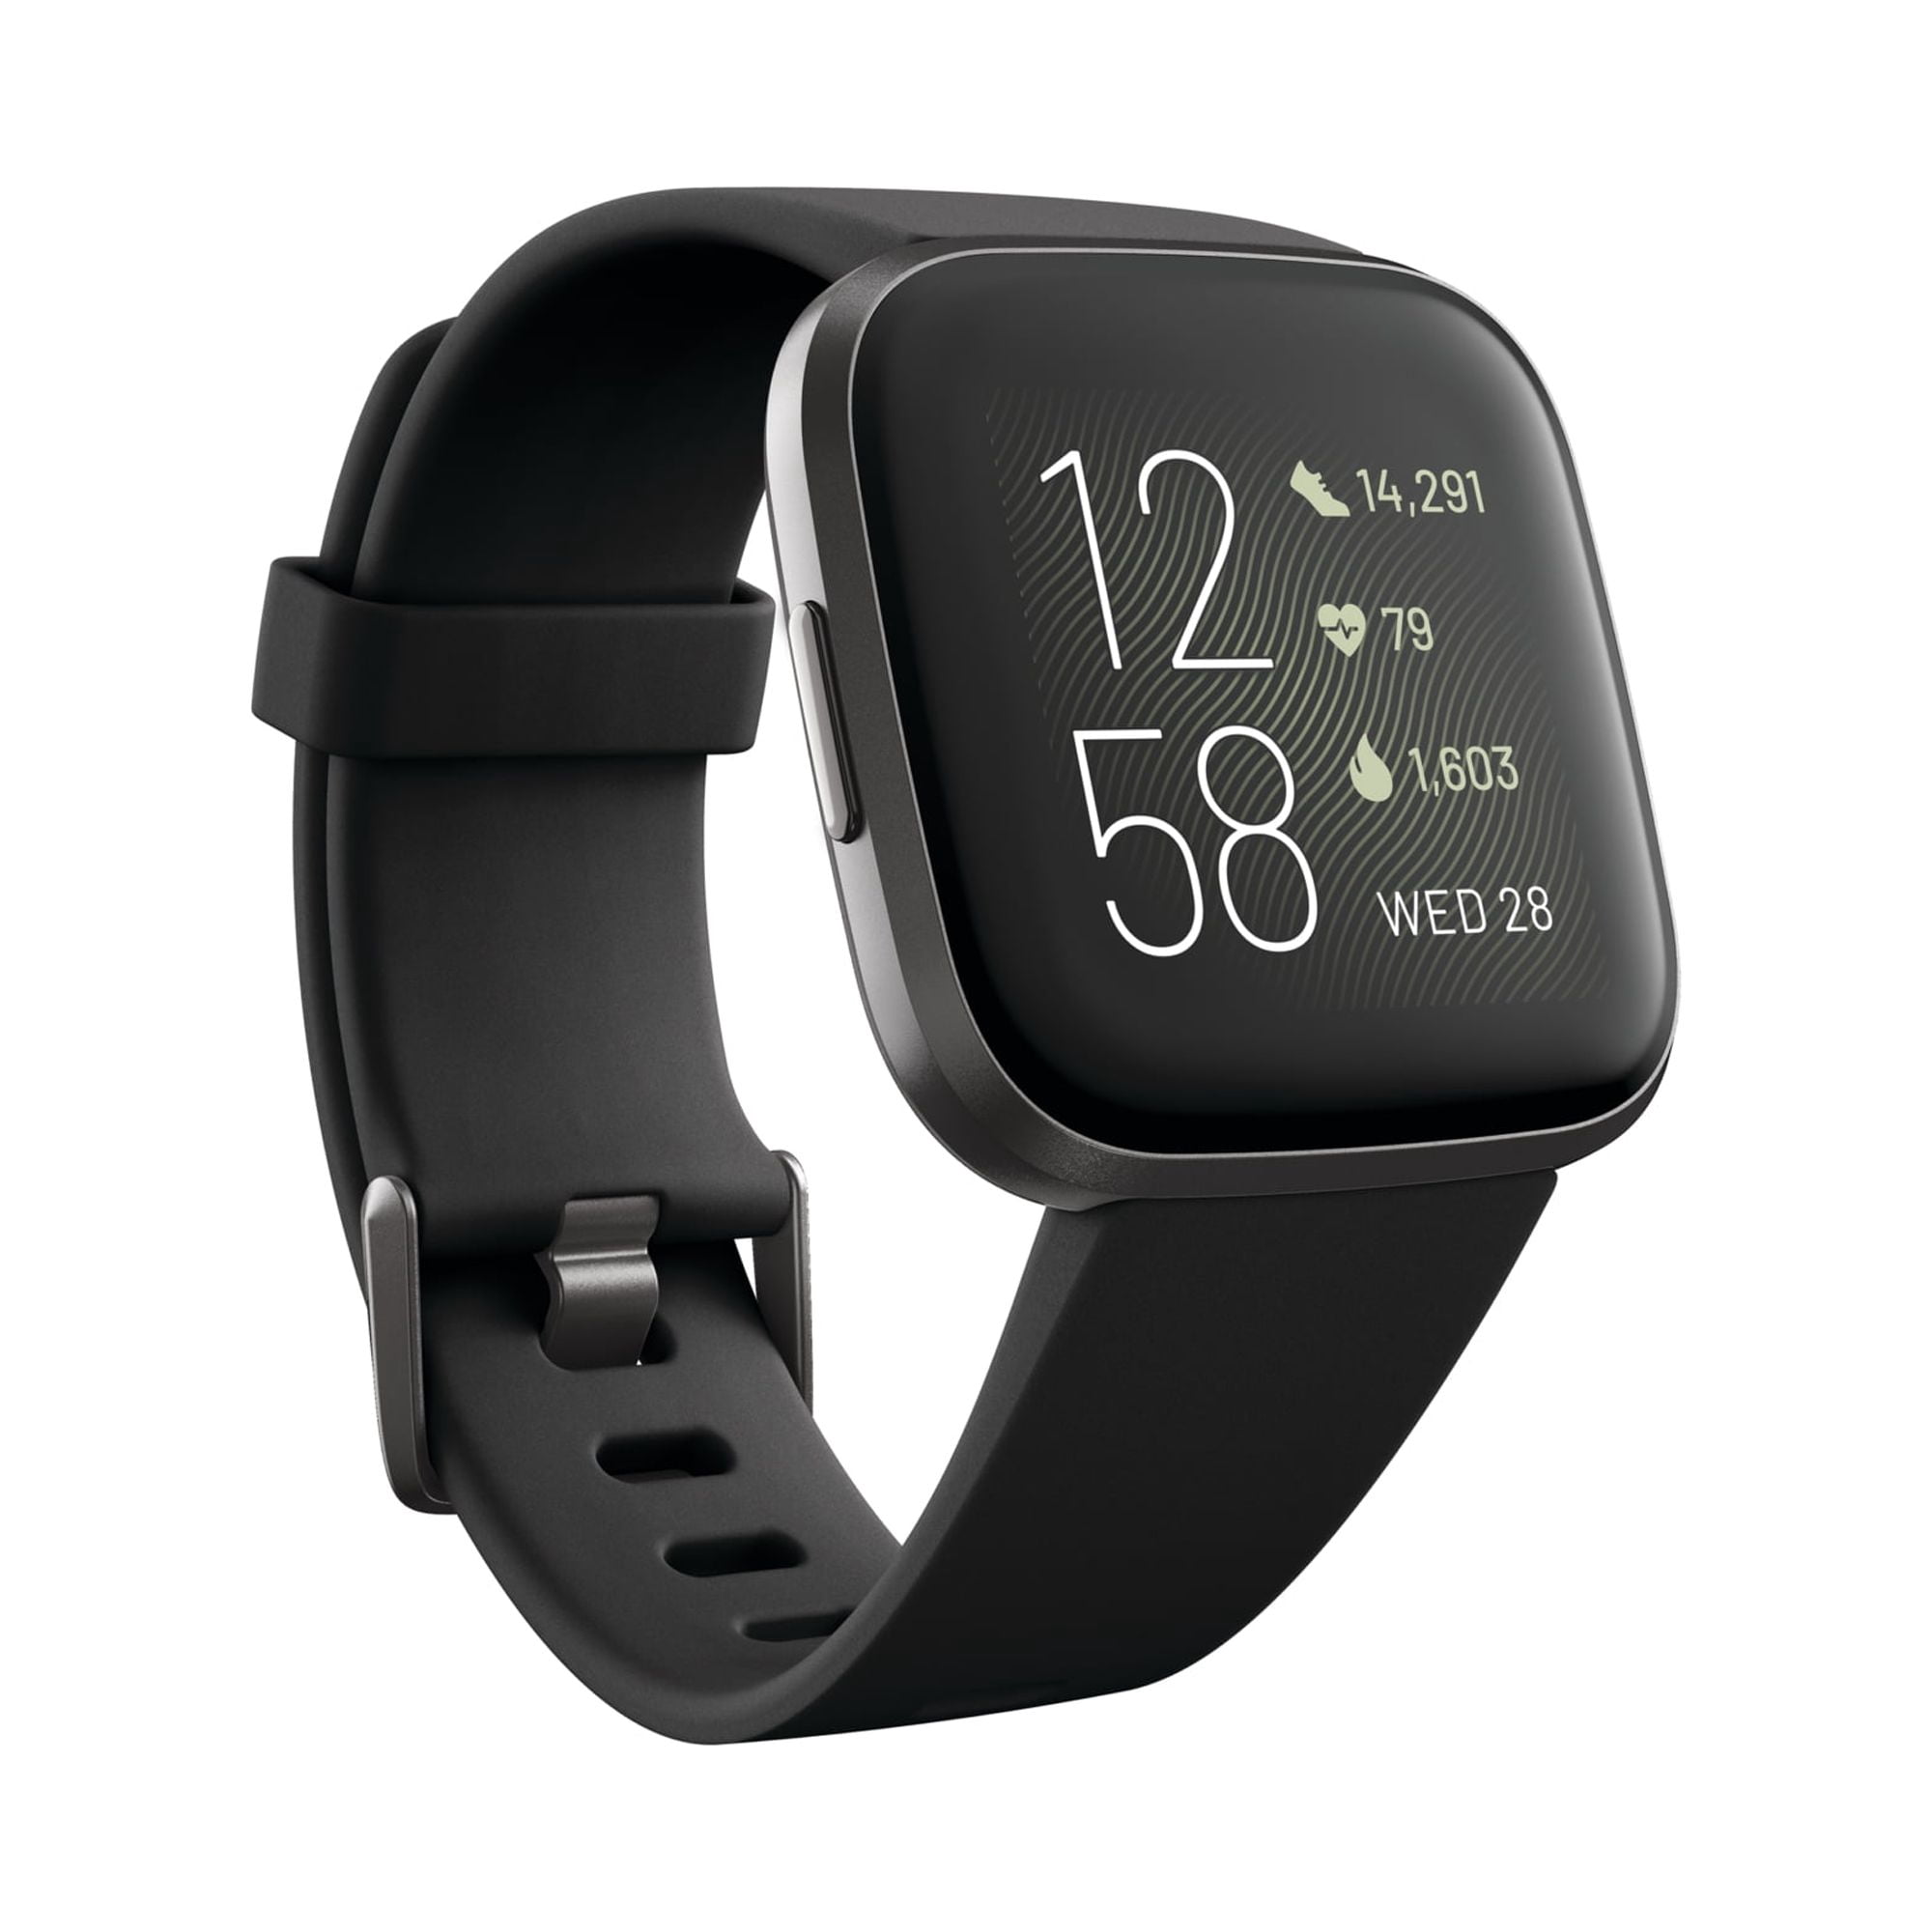 Fitbit Versa 2 Android Smartwatch, Health & Fitness Tracker – Black/Carbon Aluminum